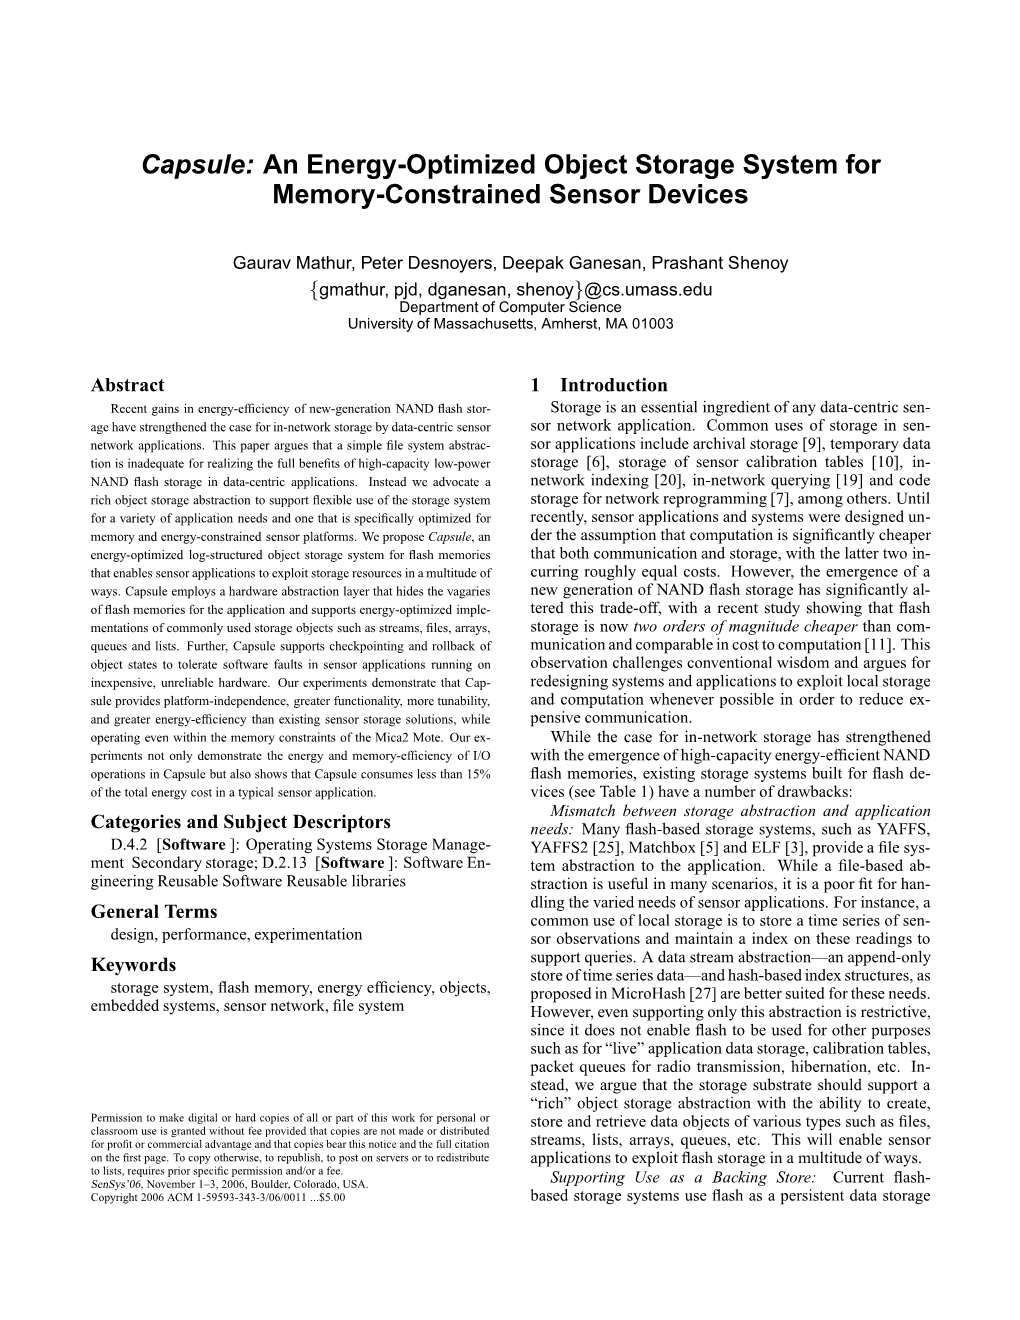 Capsule: an Energy-Optimized Object Storage System for Memory-Constrained Sensor Devices